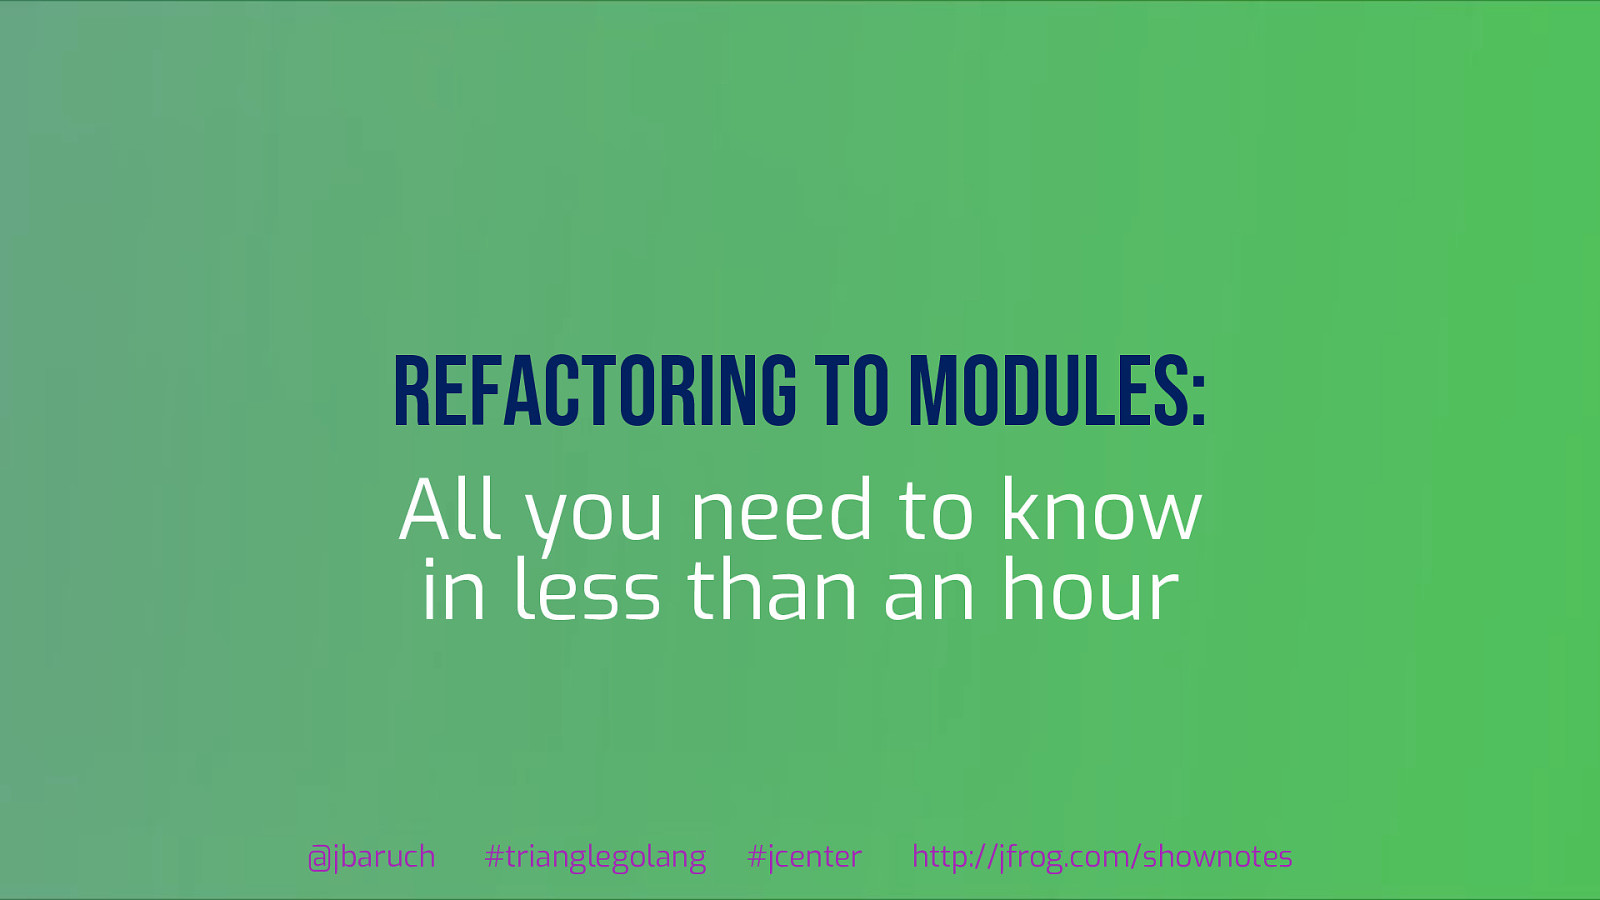 Refactoring to modules: Why and how – all you need to know in (less than) an hour